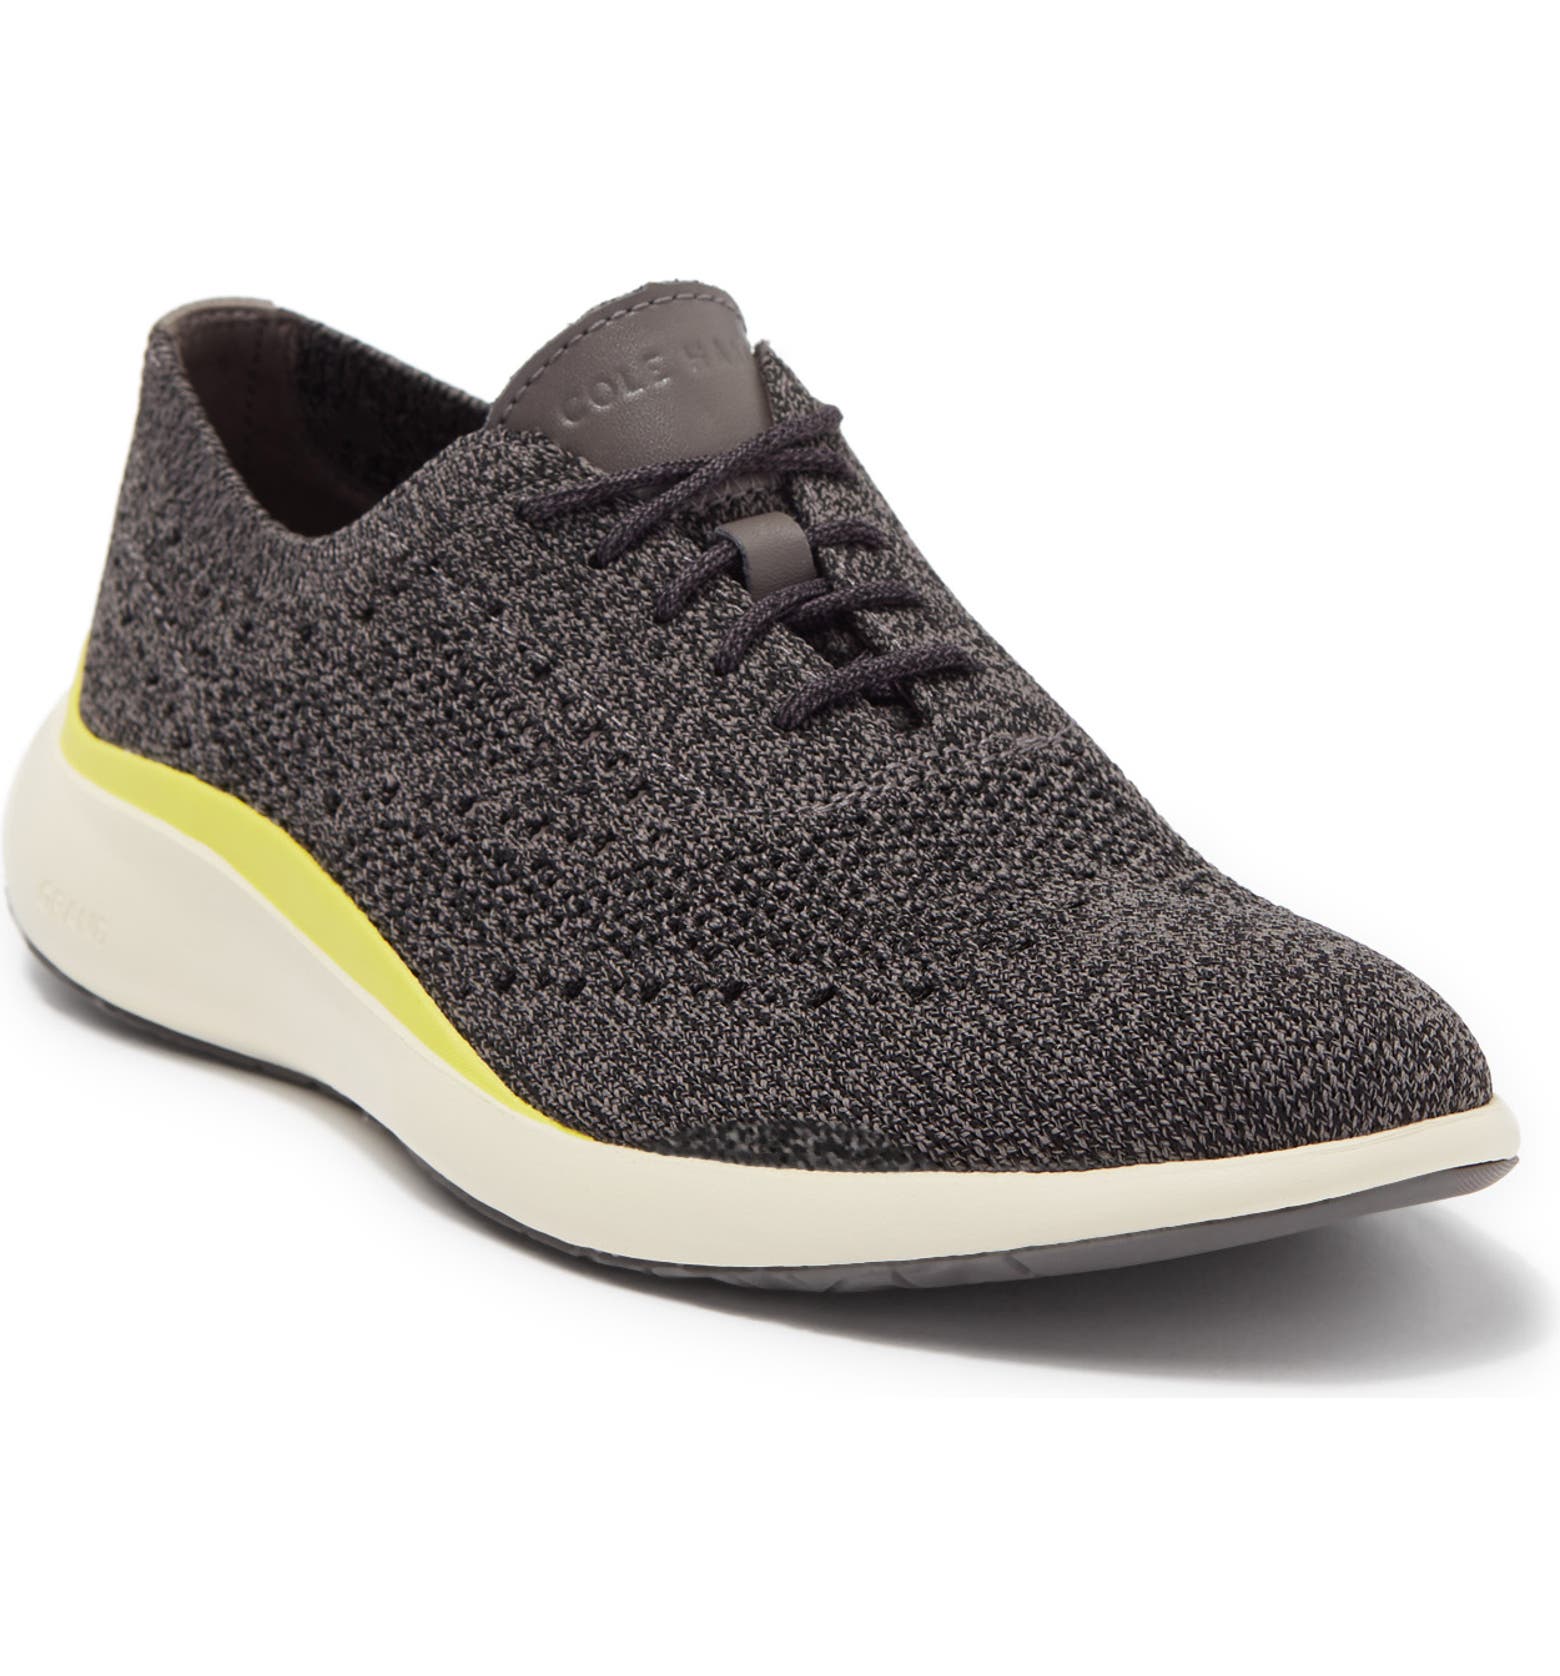 Grand Troy Knit Oxford Shoe on Sale At Nordstrom Rack